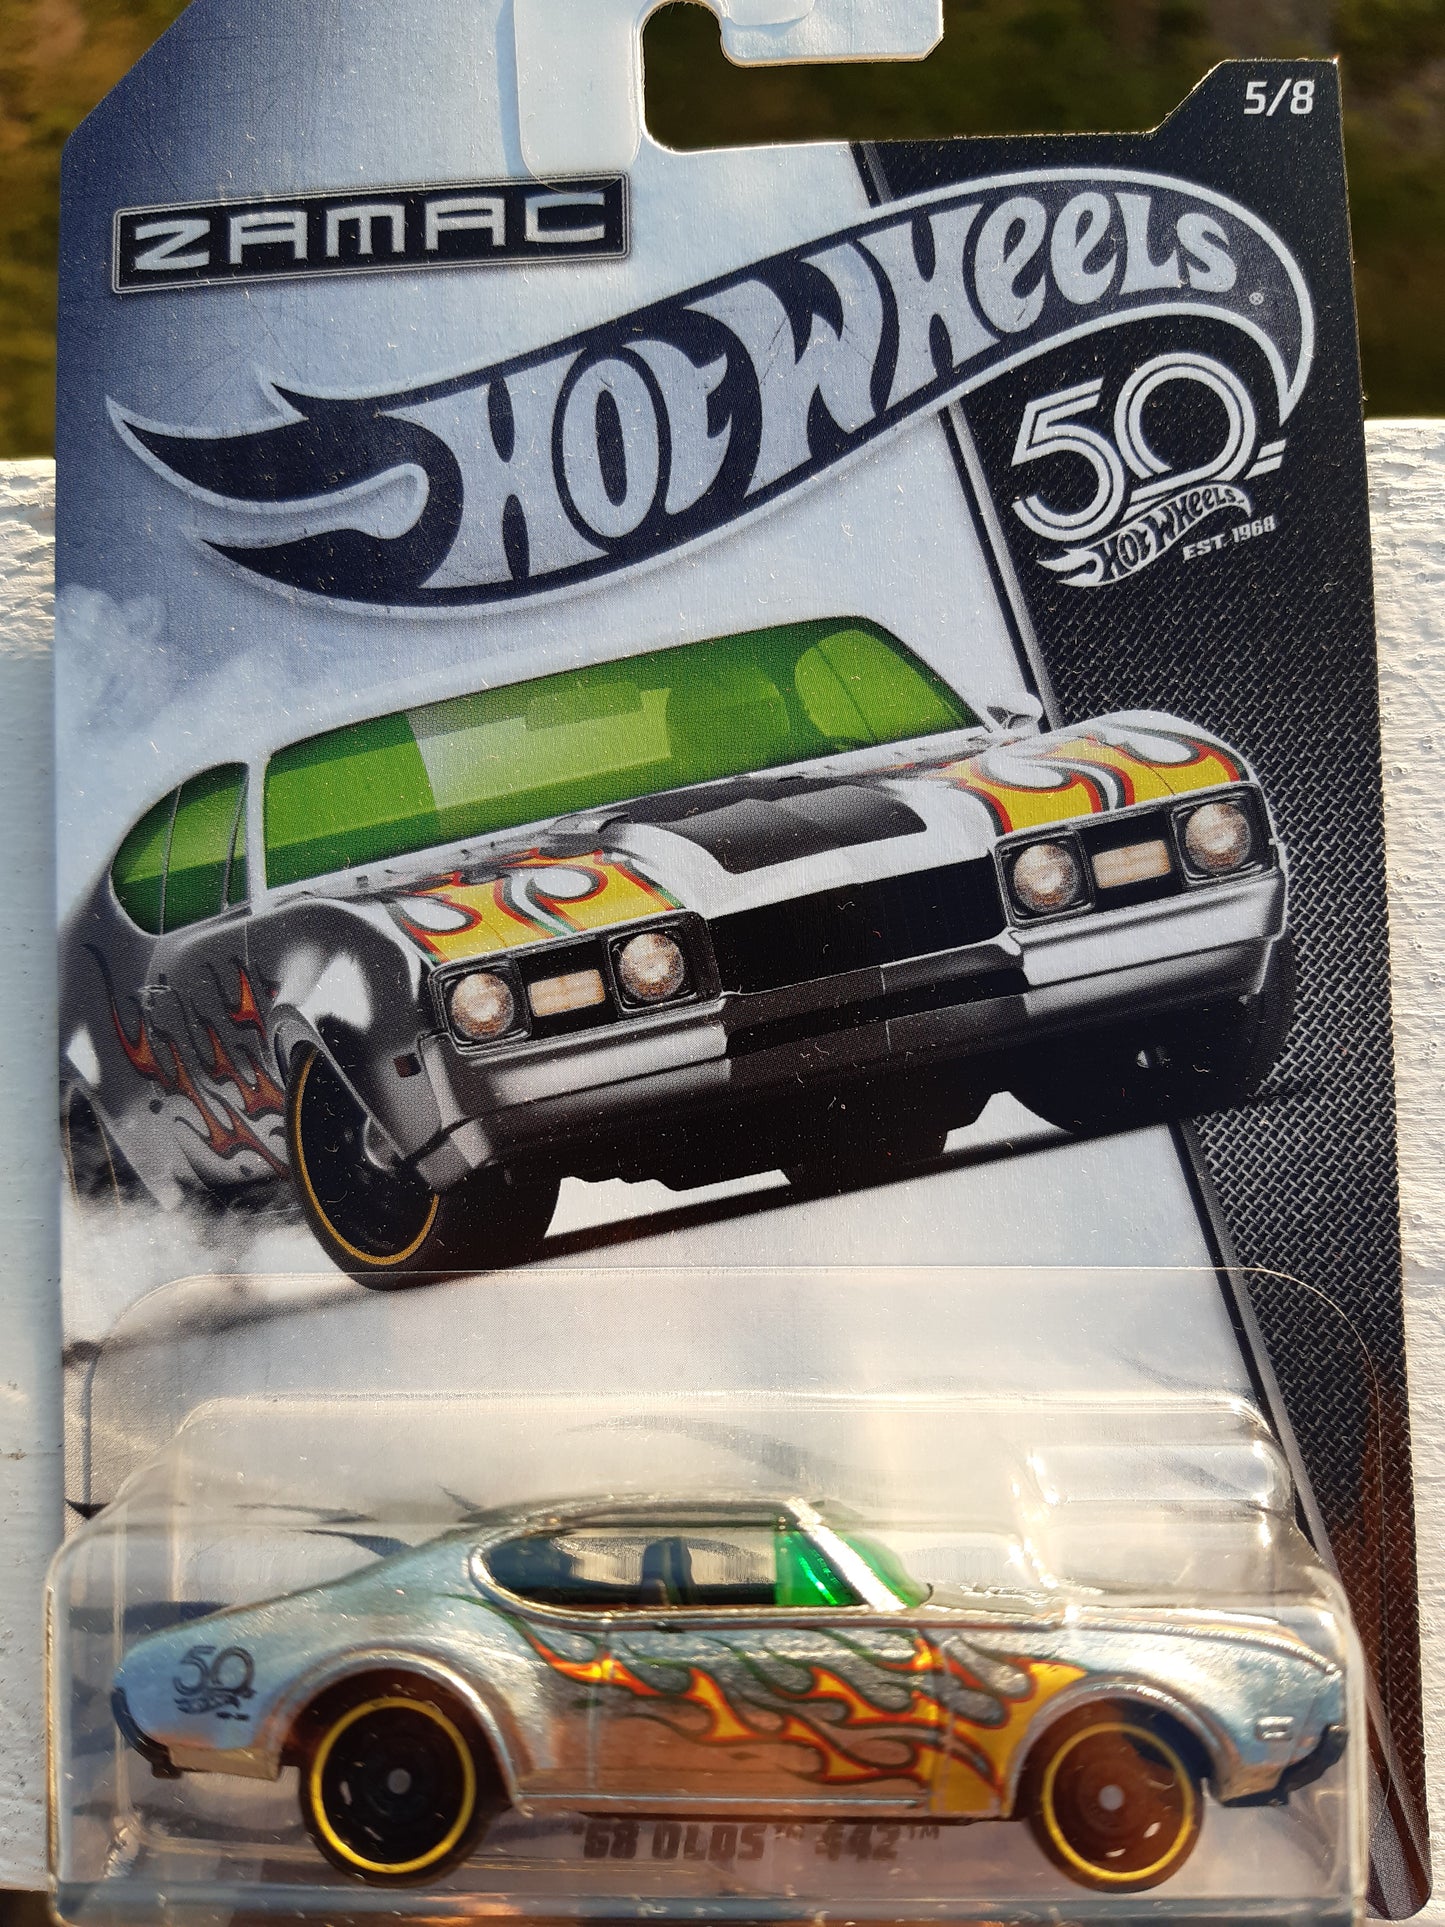 hot wheels '68 olds 442